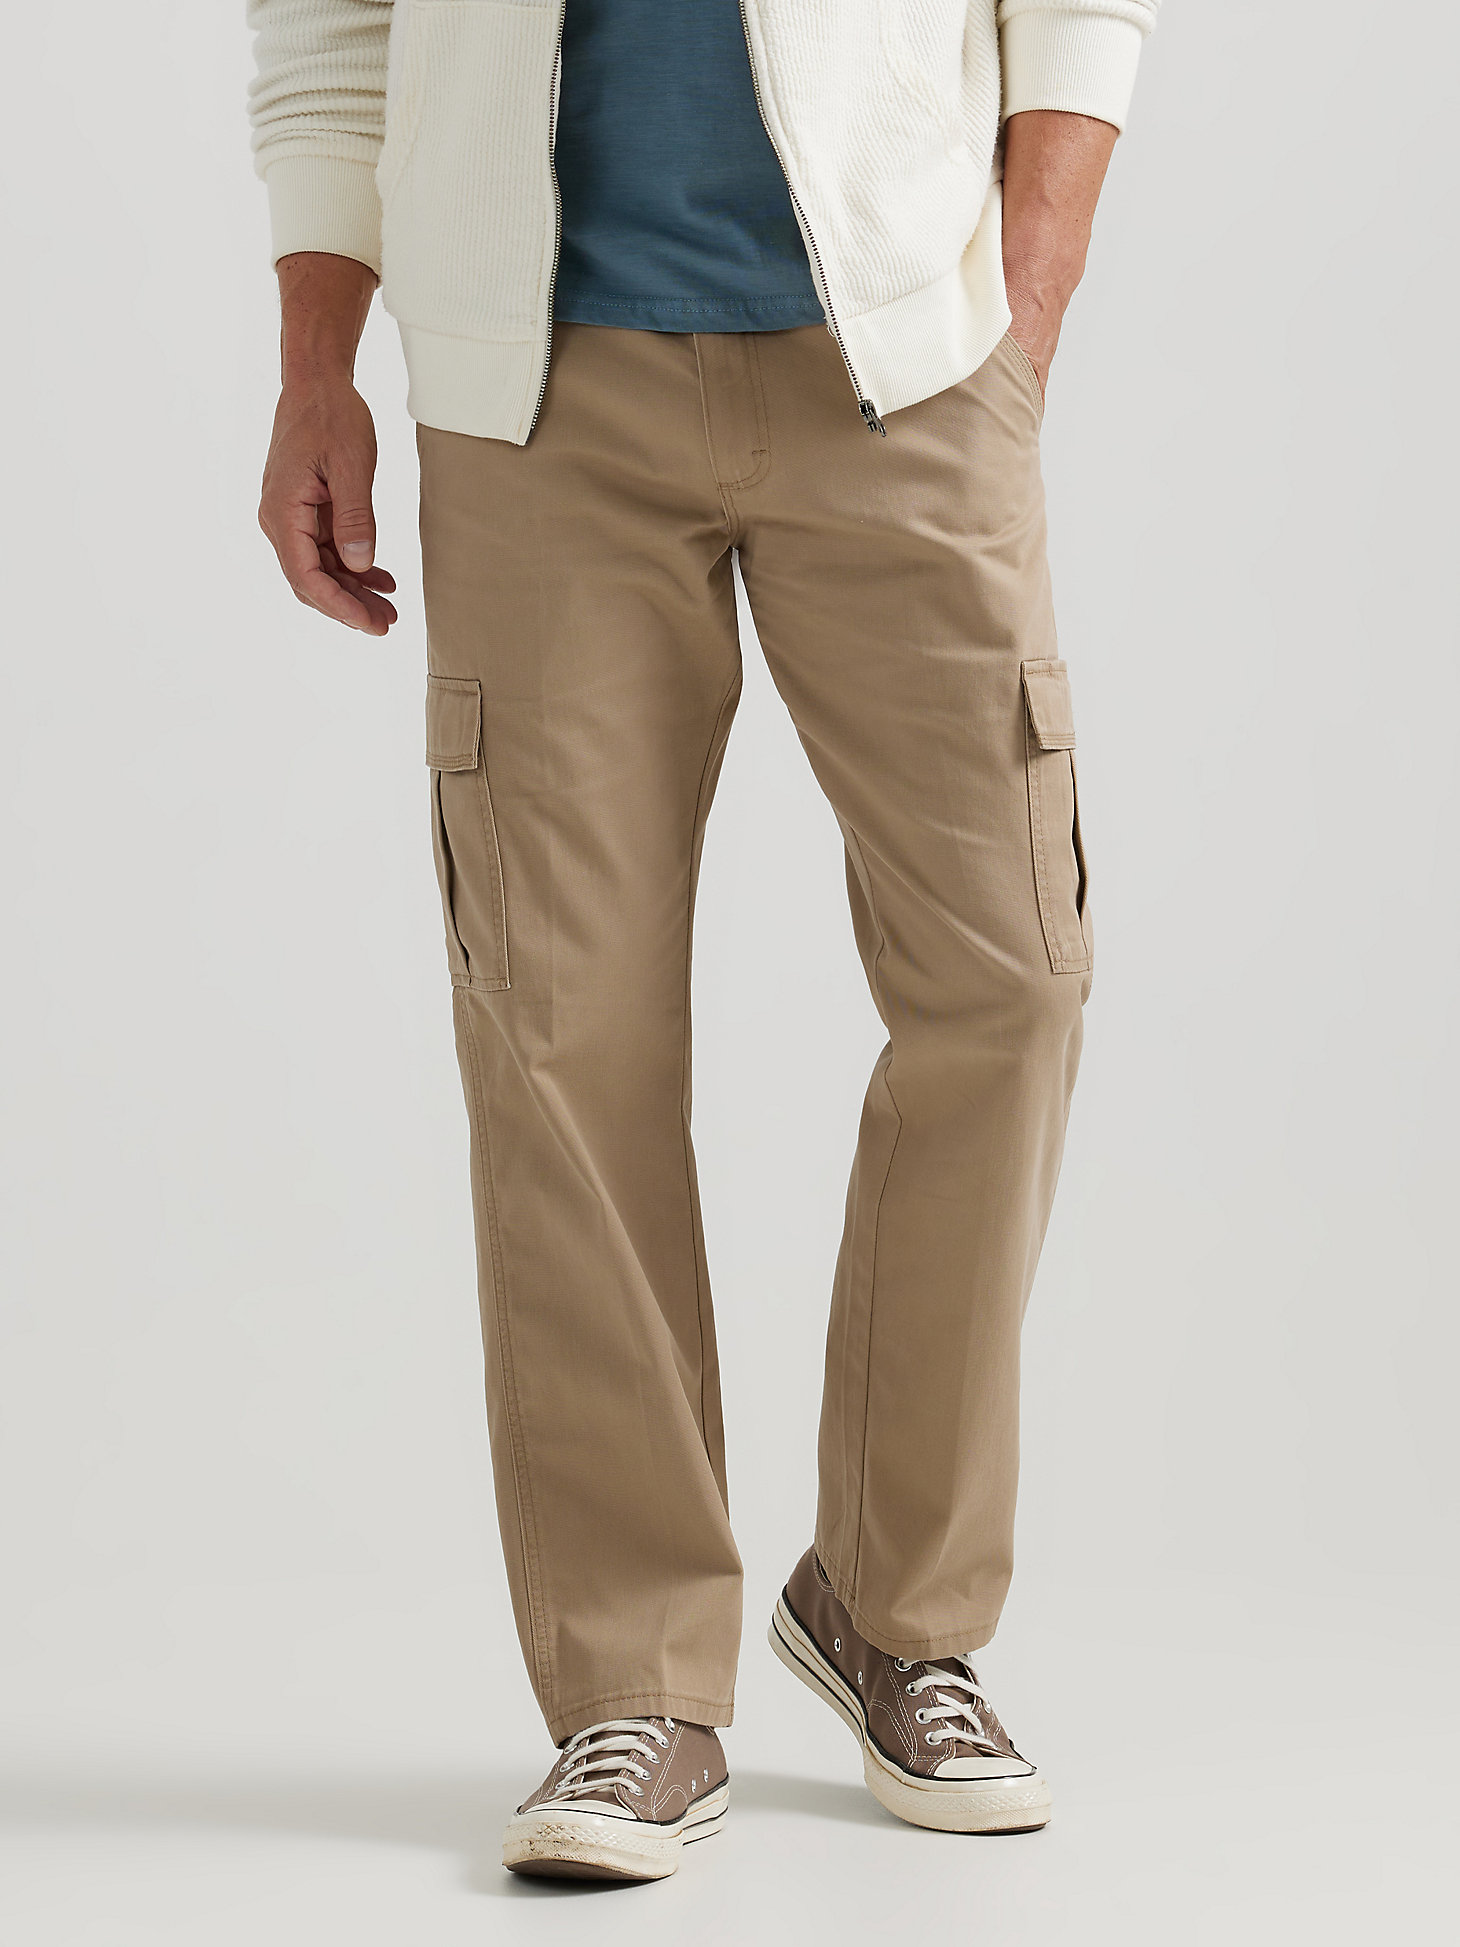 Wrangler Authentics Men/'s Classic Twill Relaxed Fit Cargo Pant